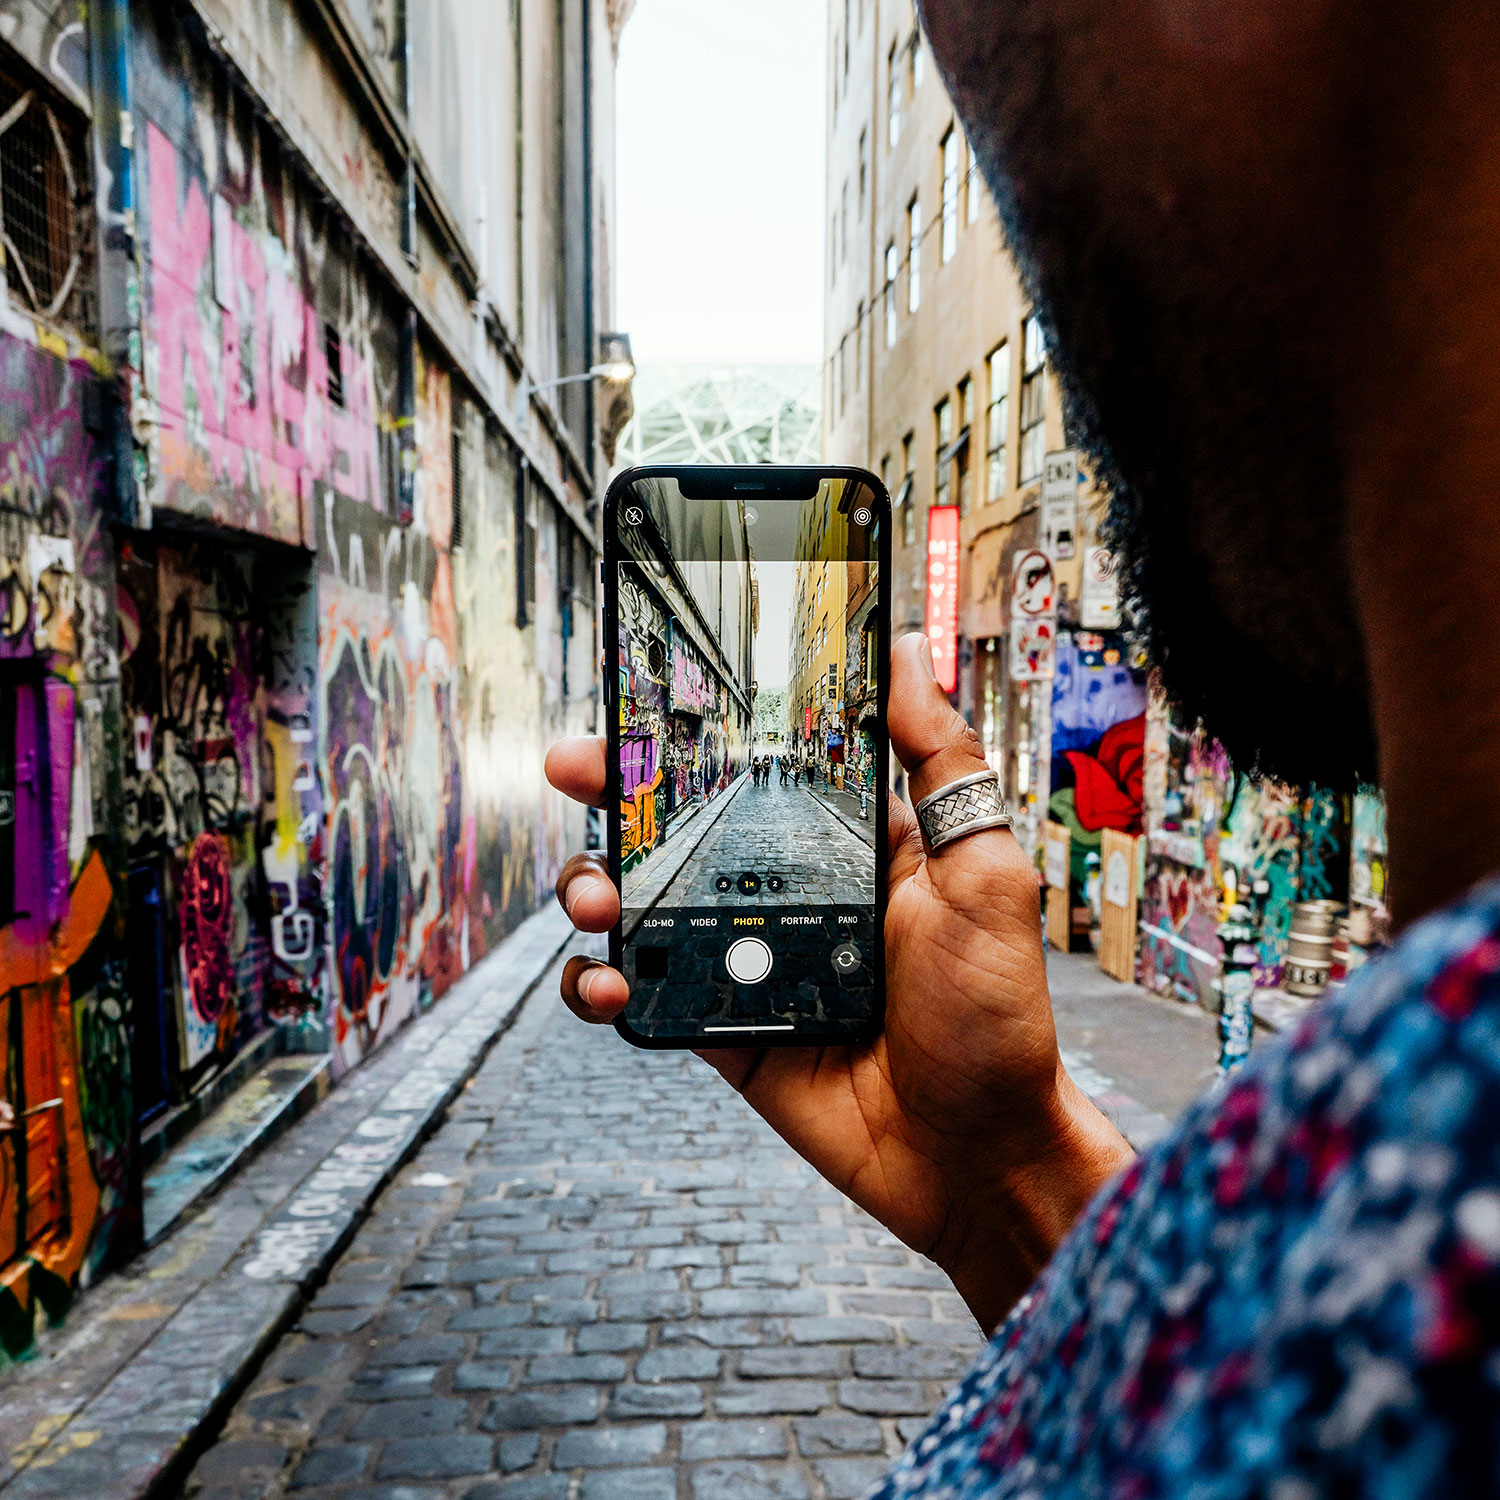 Melbourne's Hosier Lane is one of the city's most colourful, and situated close to the famed collection of MoVida restaurants and bars